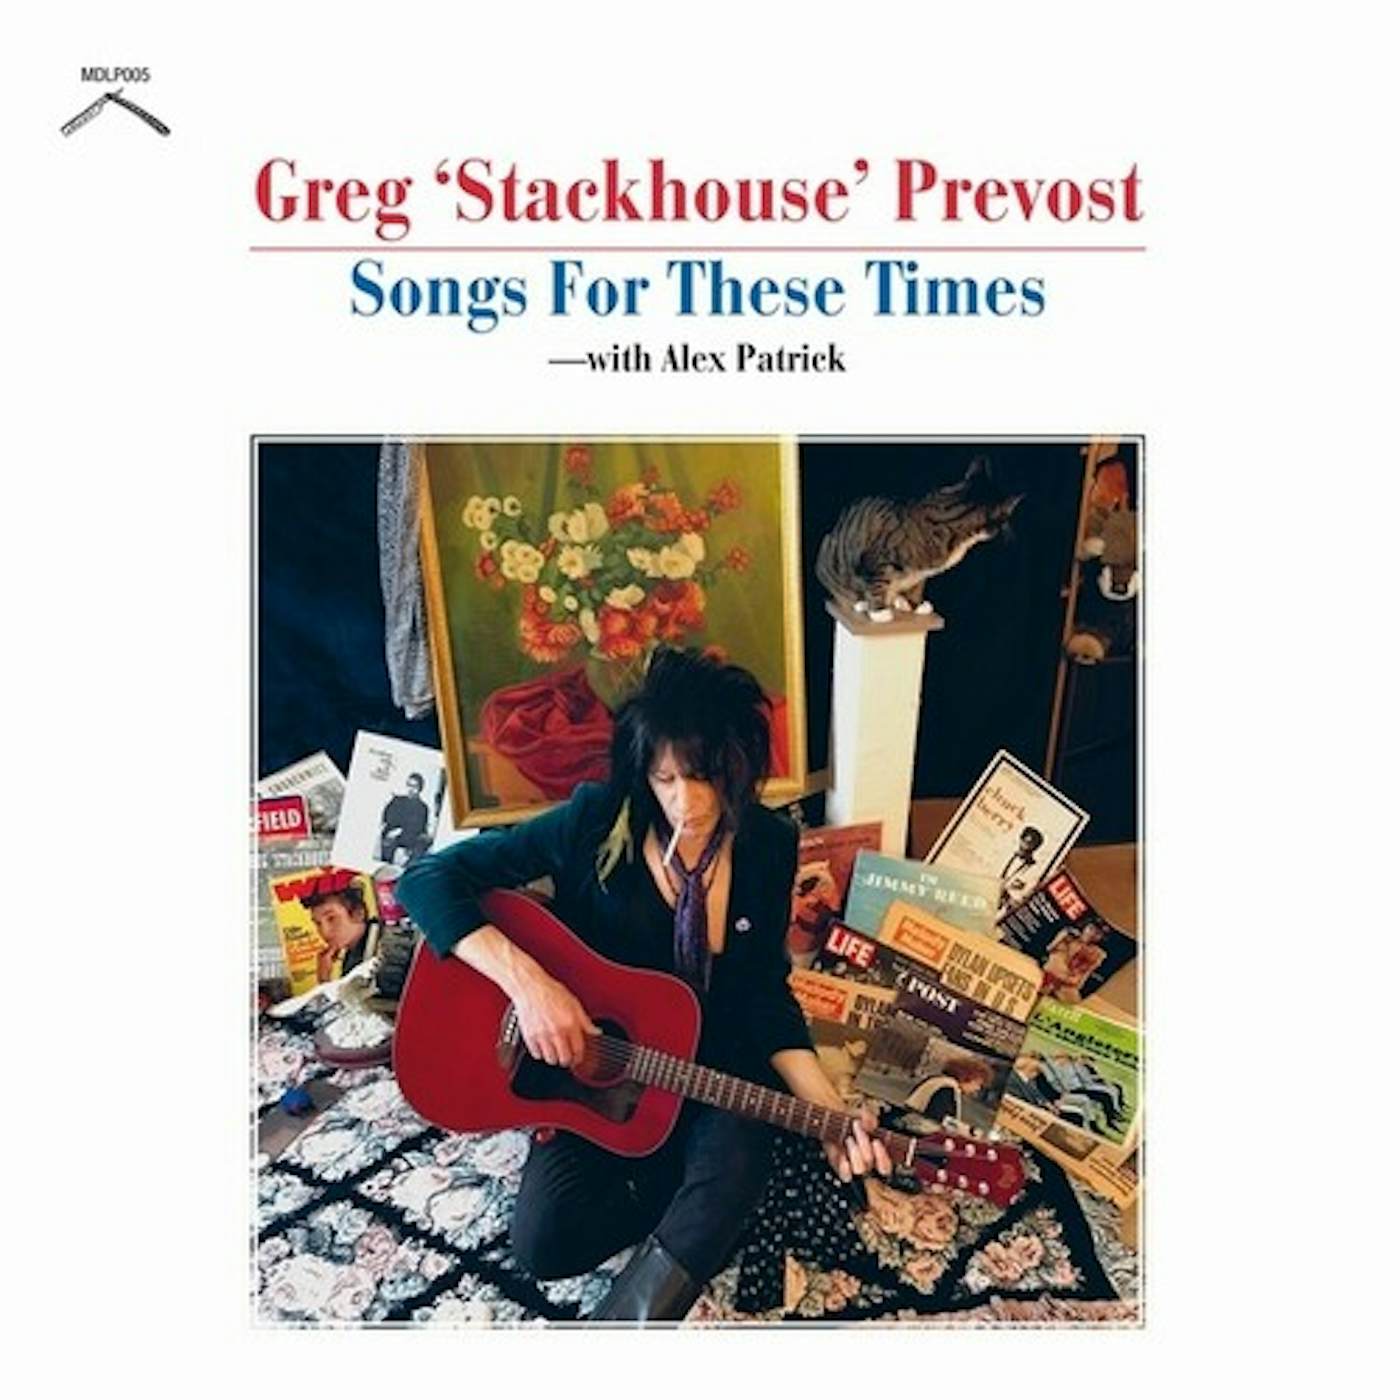 Greg 'Stackhouse' Prevost SONGS FOR THESE TIMES CD